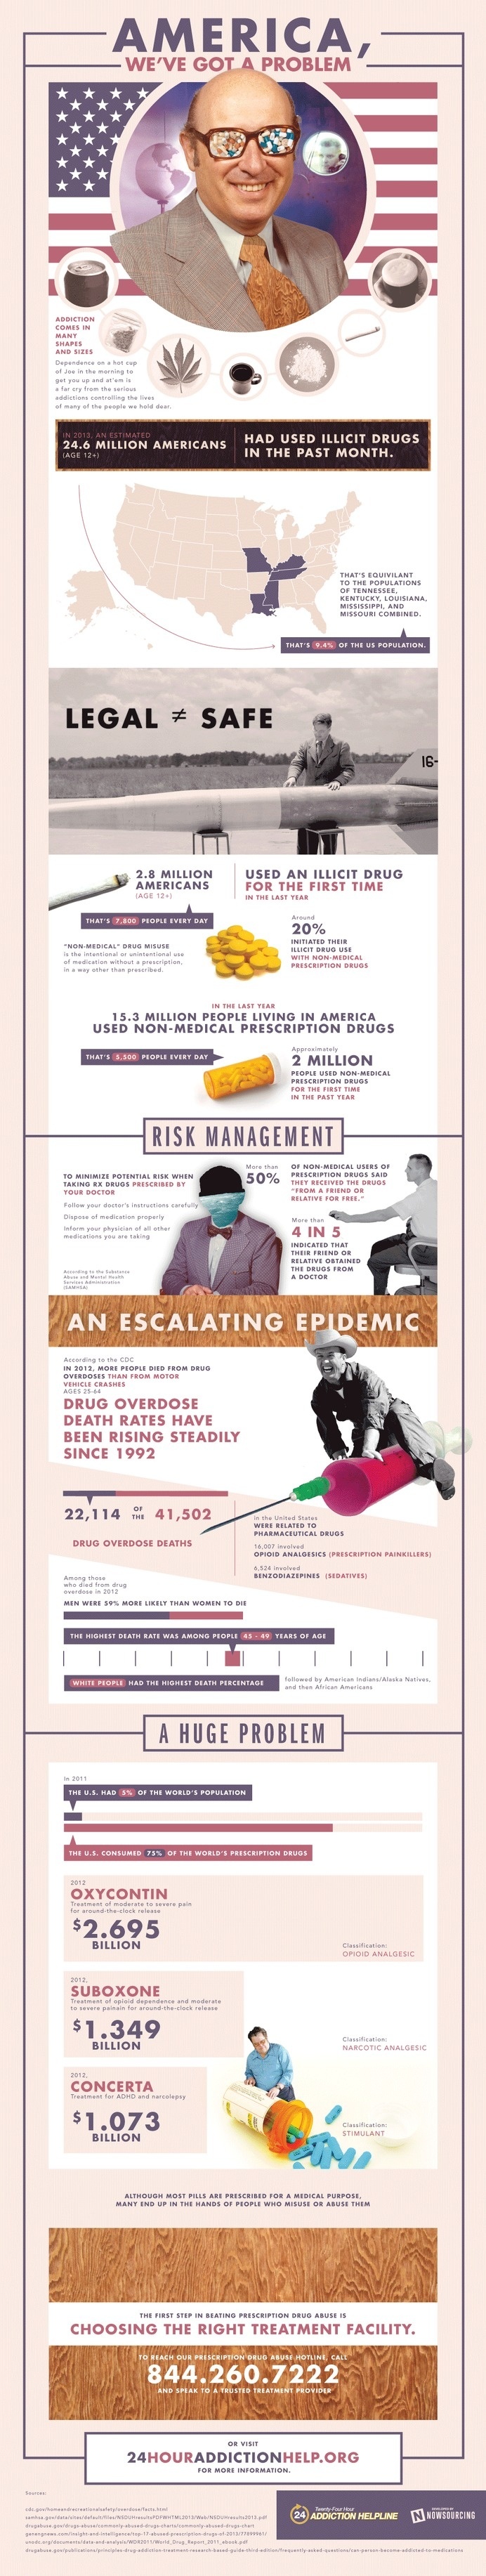 Prescription drug abuse is a serious problem in the U.S.Learn more about it from this infographic. #prescription drug abuse #recovery help